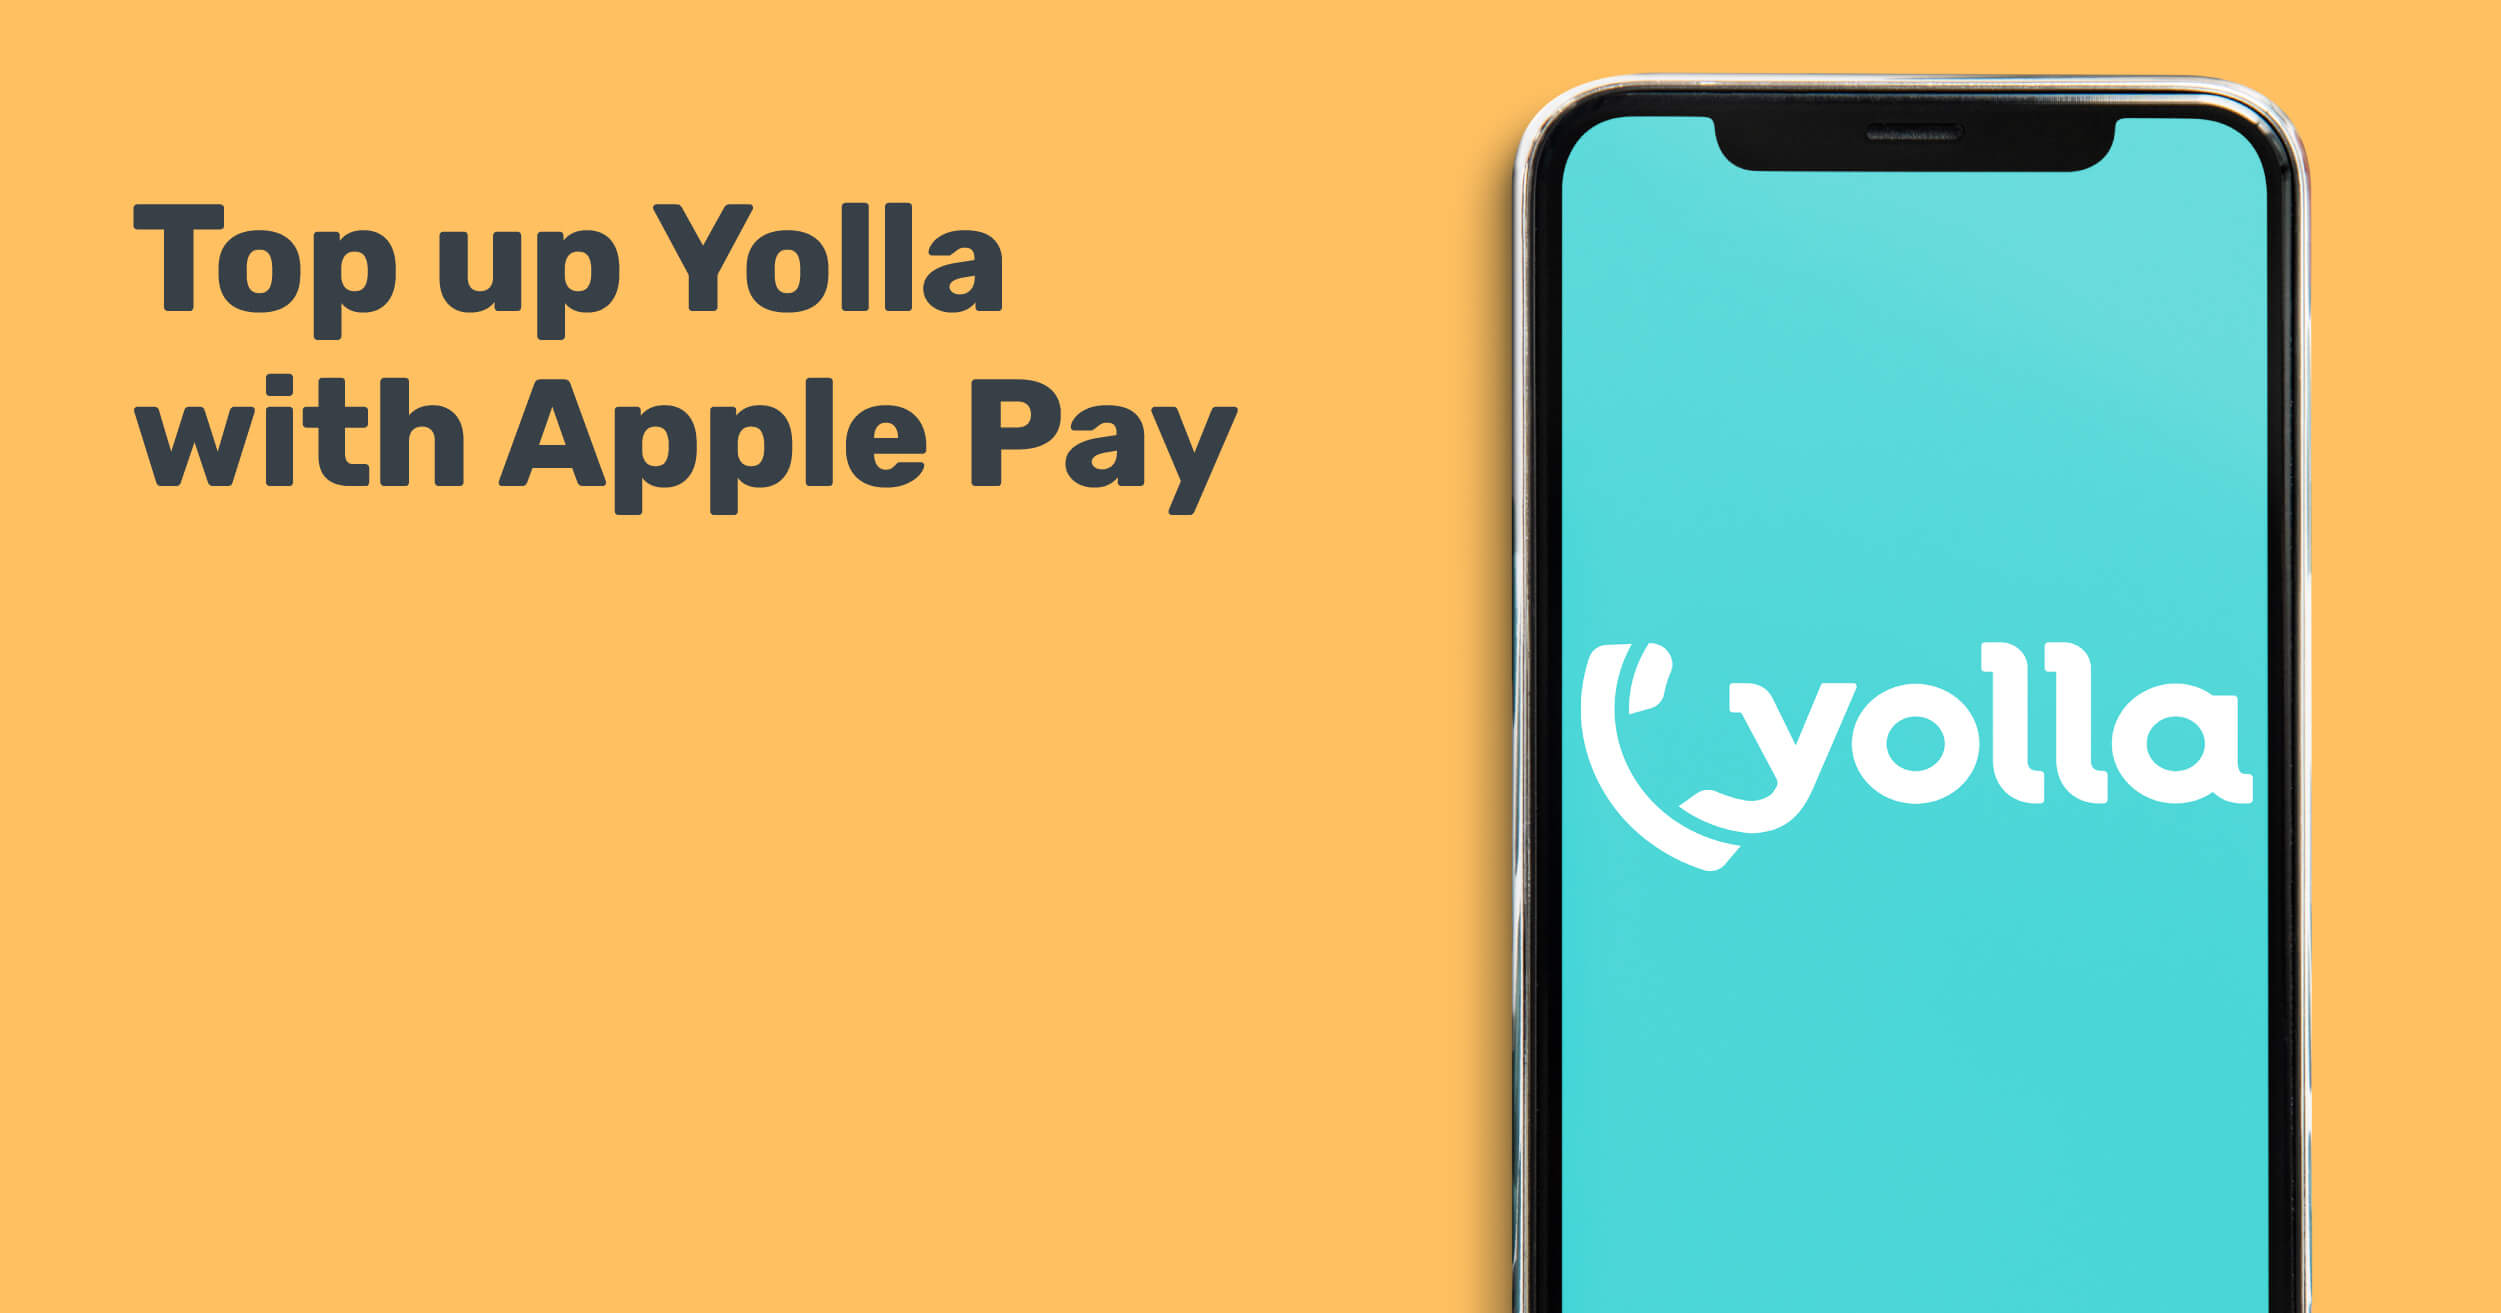 Top up Yolla with Apple Pay